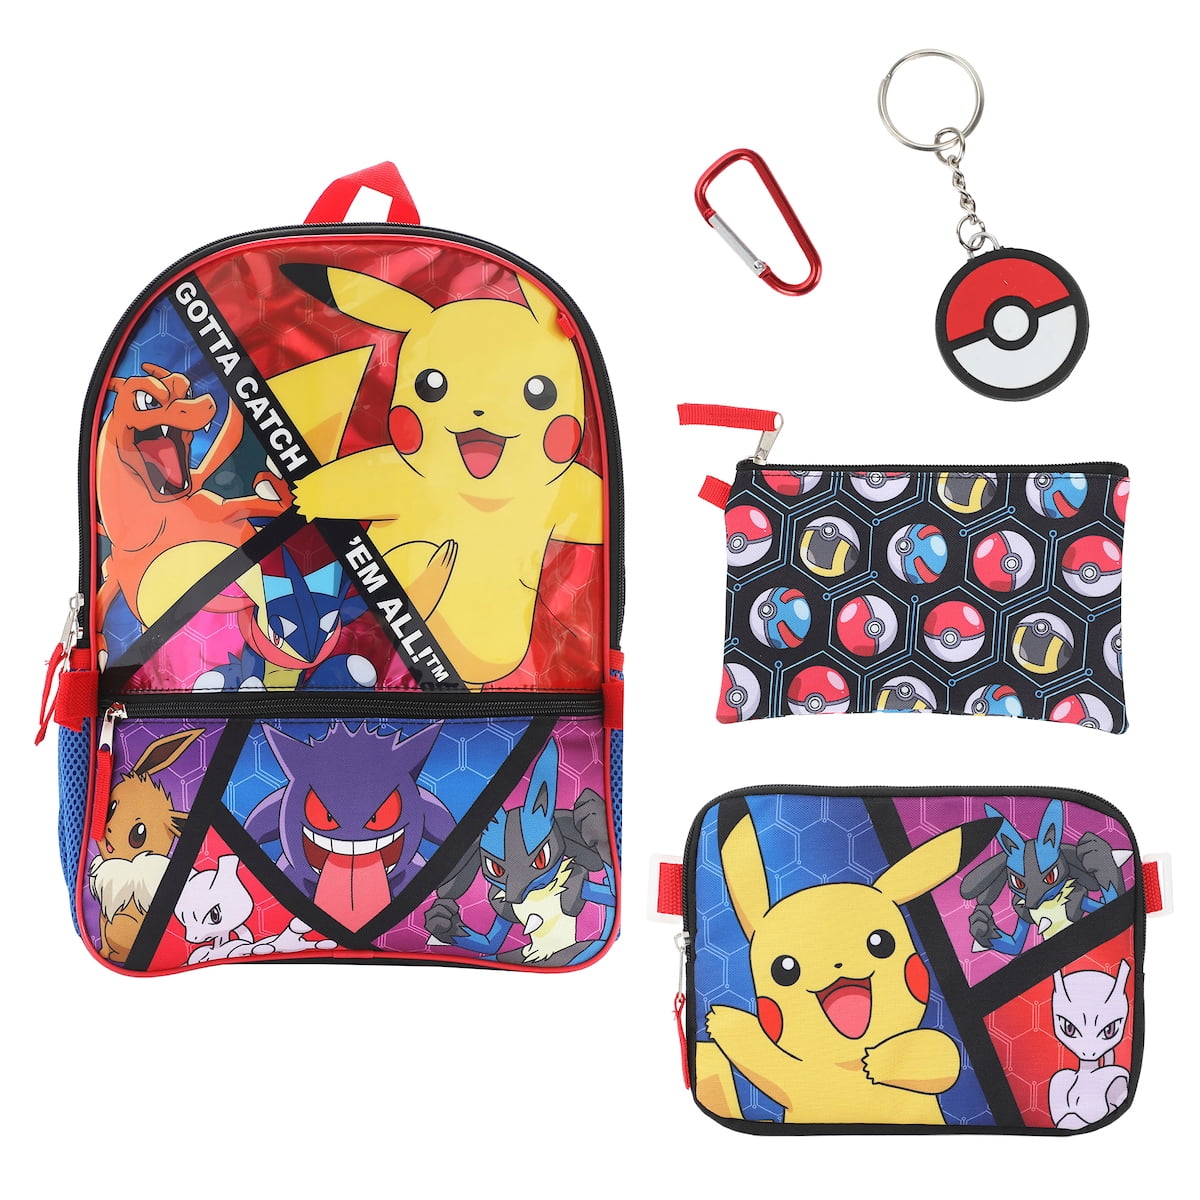 Pokemon 4 Piece Set: Backpack, Lunch Bag, Pencil Case & Water